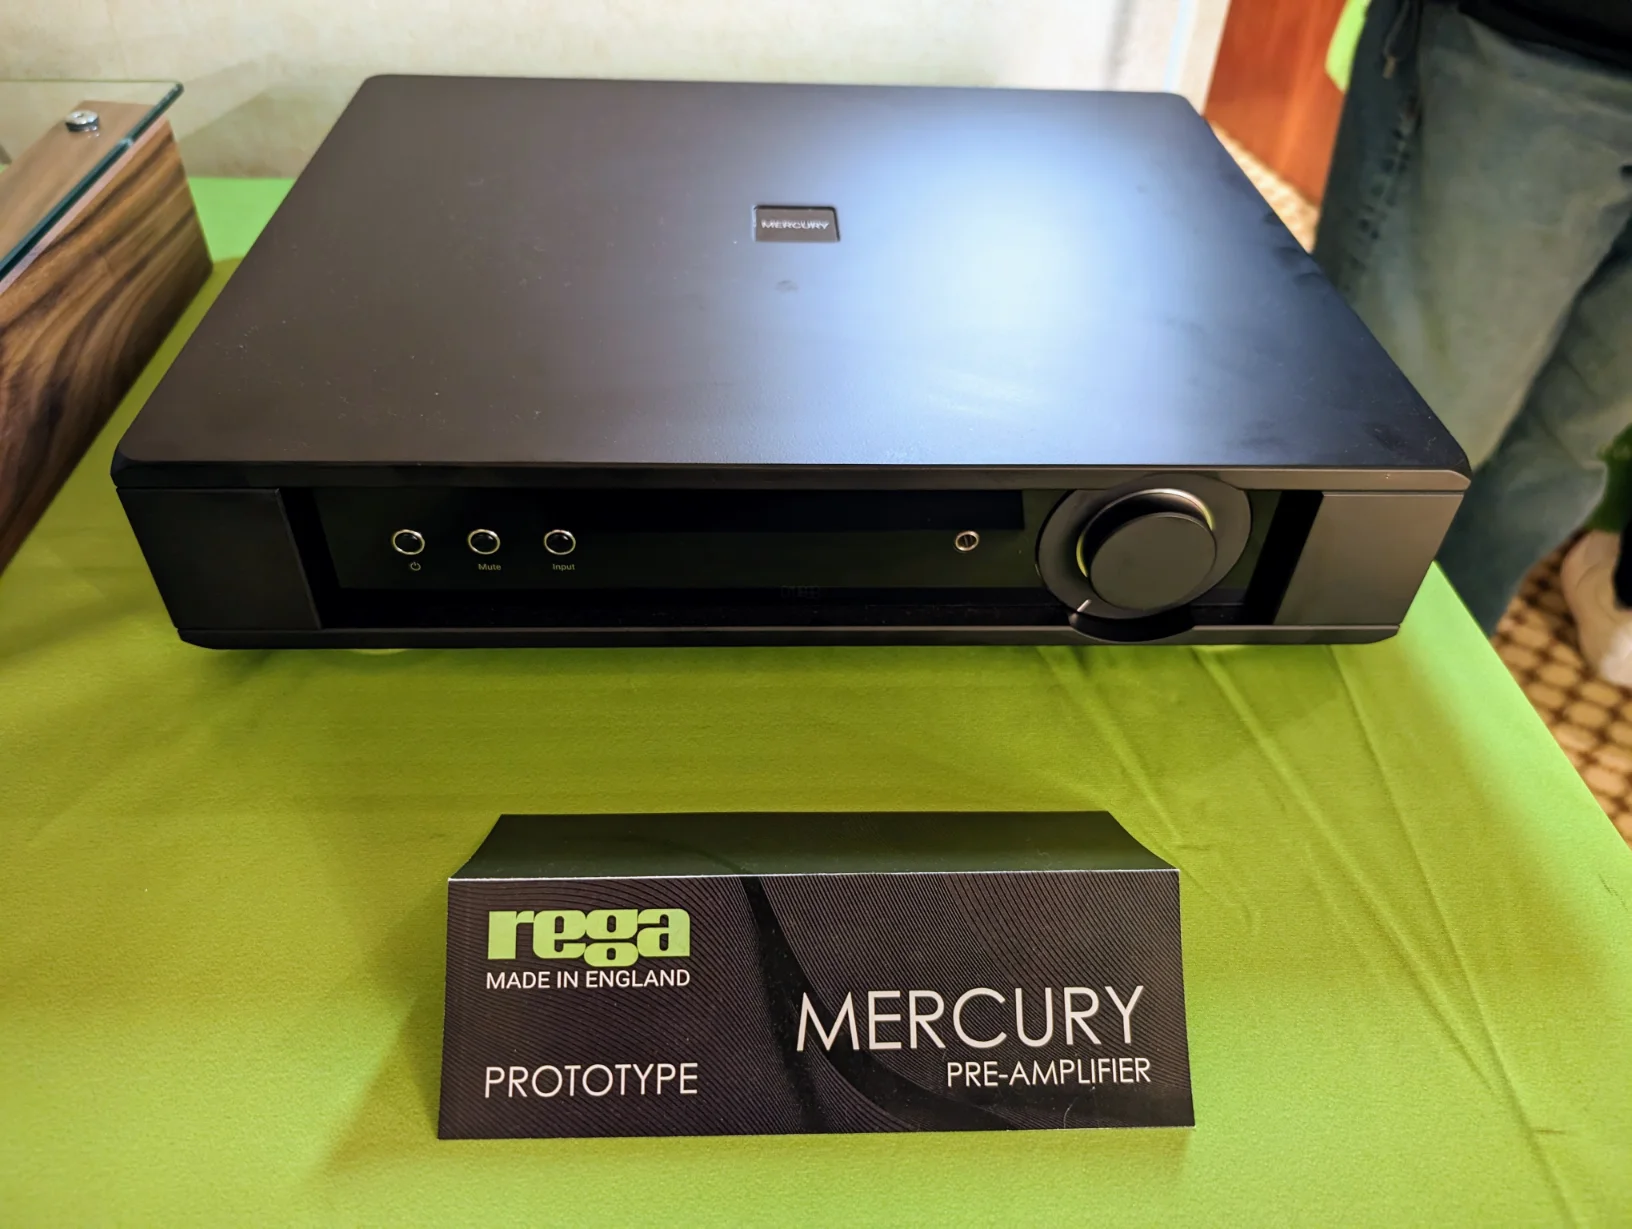 We were treated to a sneak preview of the new Rega Pre/Power. Here is the Mercury pre-amp with integrated DAC. We already have interest in these even though they were static prototypes…